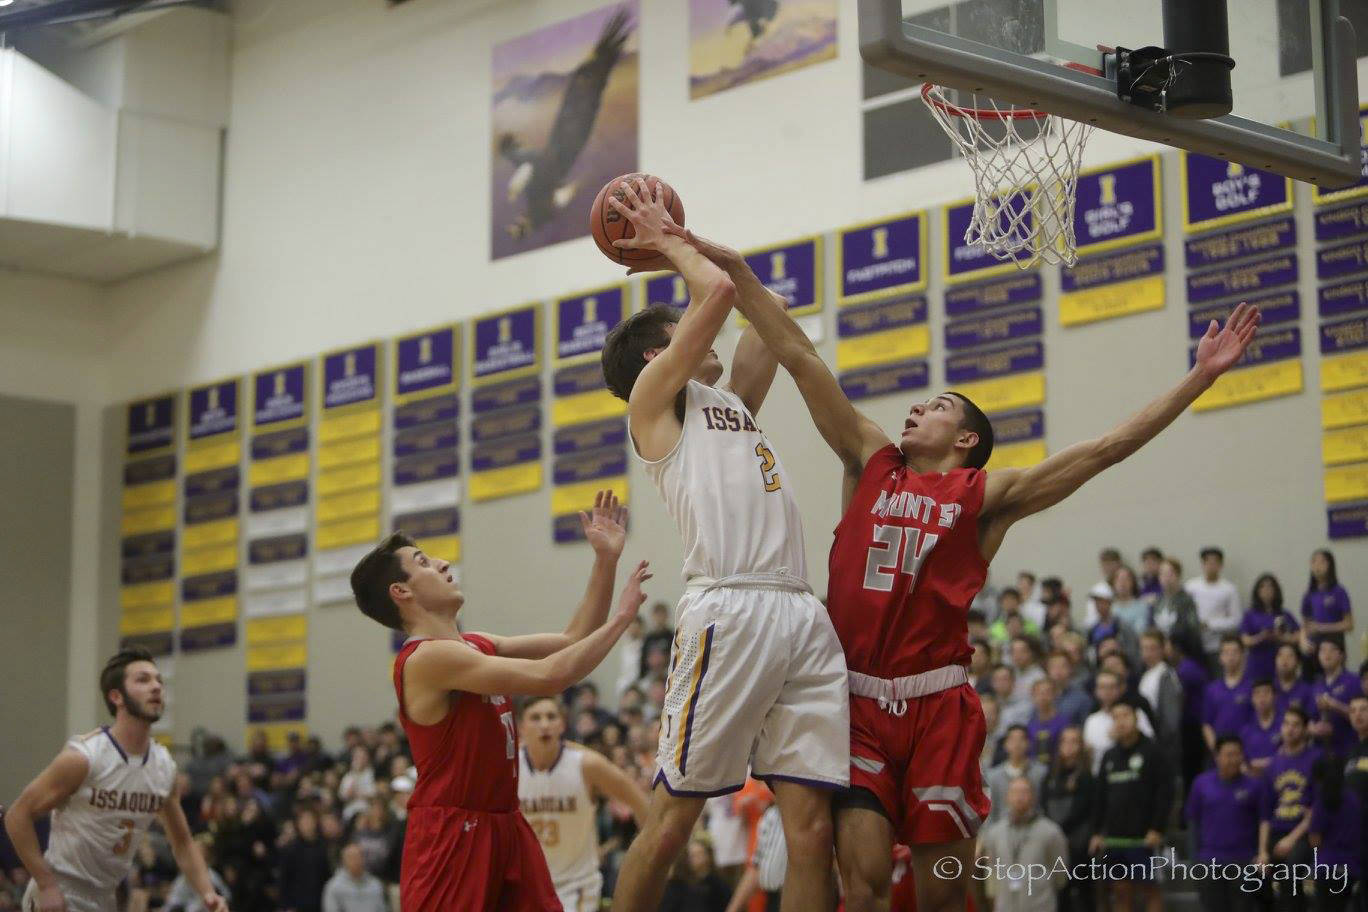 Mount Si Wildcats player Bijon Sidhu, right, tries to block a shot against Issaquah forward Will Farmer in a KingCo 4A contest between rivals on Jan. 5. The Wildcats finished the 2017-18 season with an overall record of 13-11.                                Photo courtesy of Don Borin/Stop Action Photography